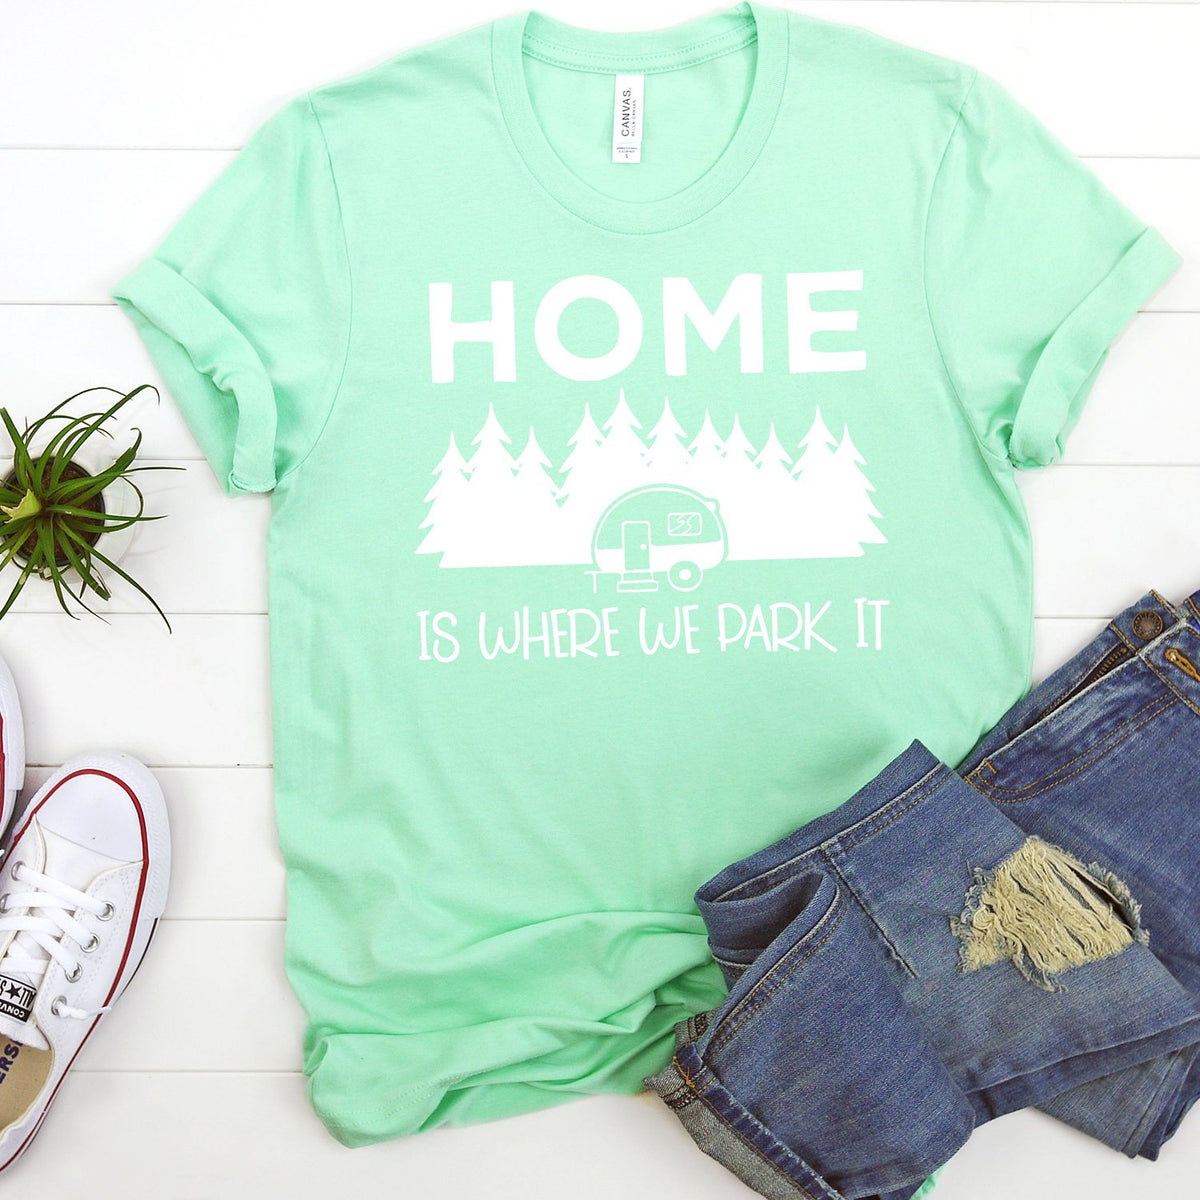 Home Is Where We Park It - Short Sleeve Tee Shirt